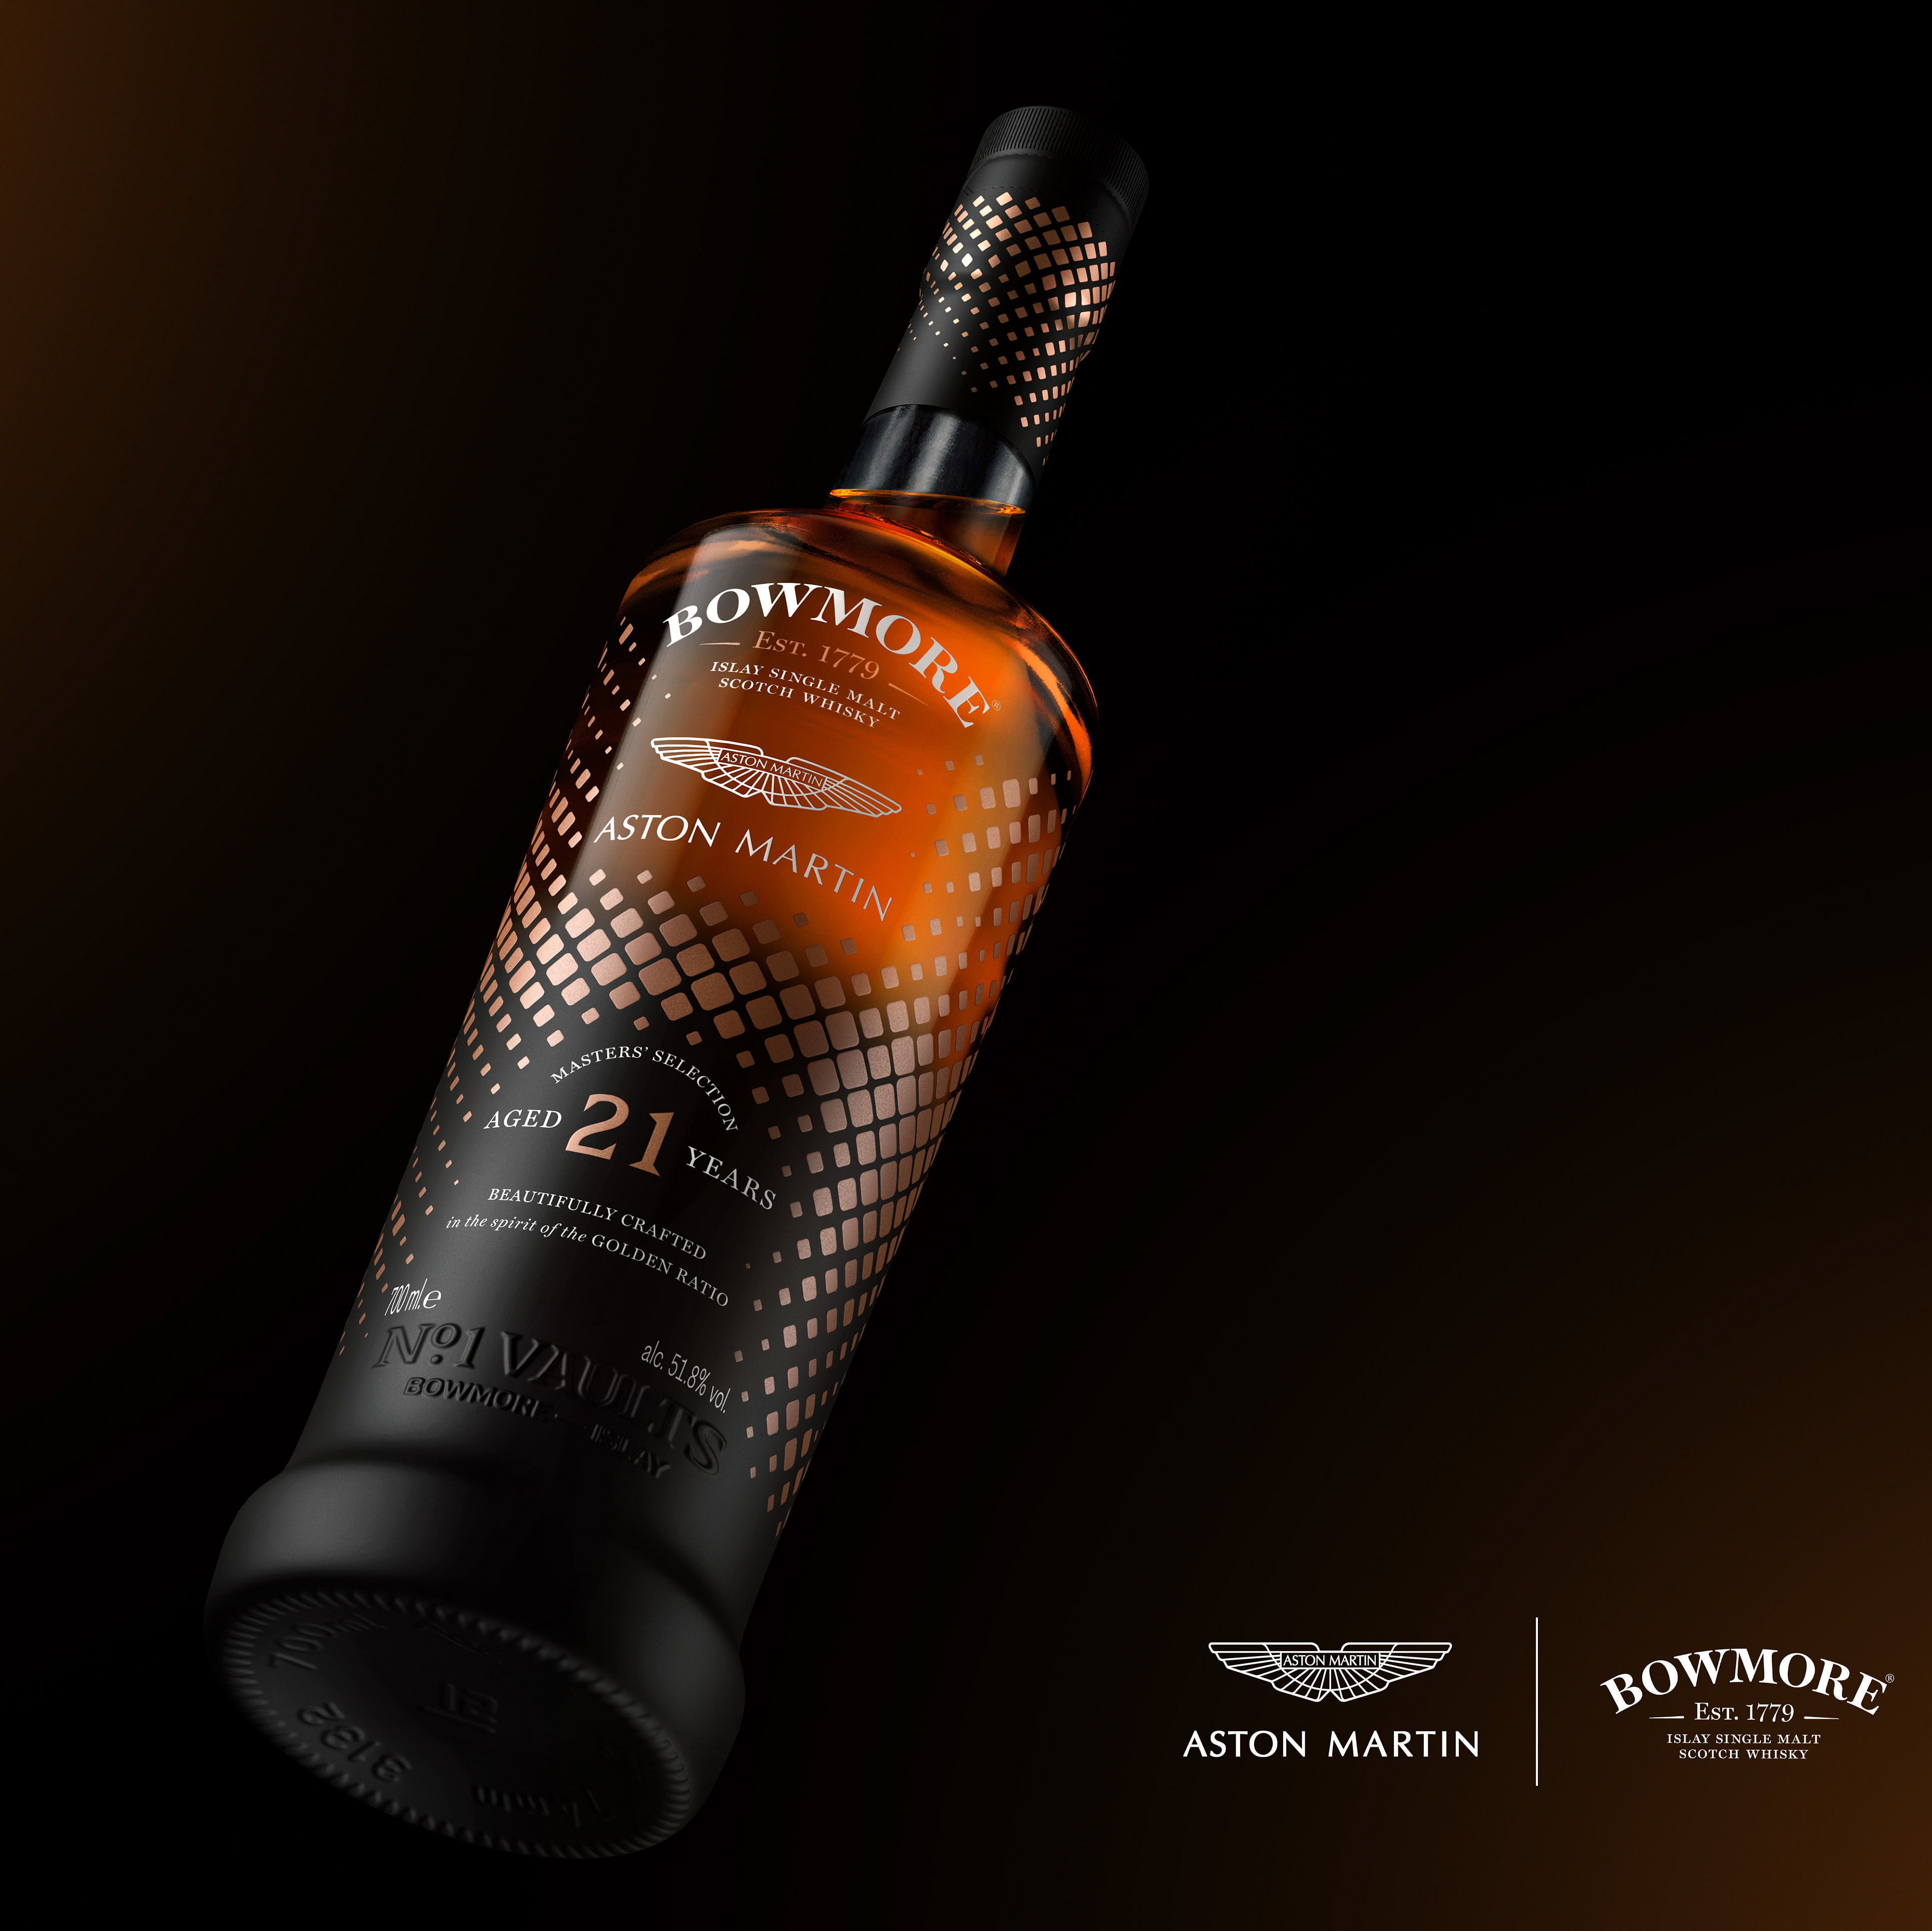 The Bowmore Aston Martin 21 Year Old bottle.